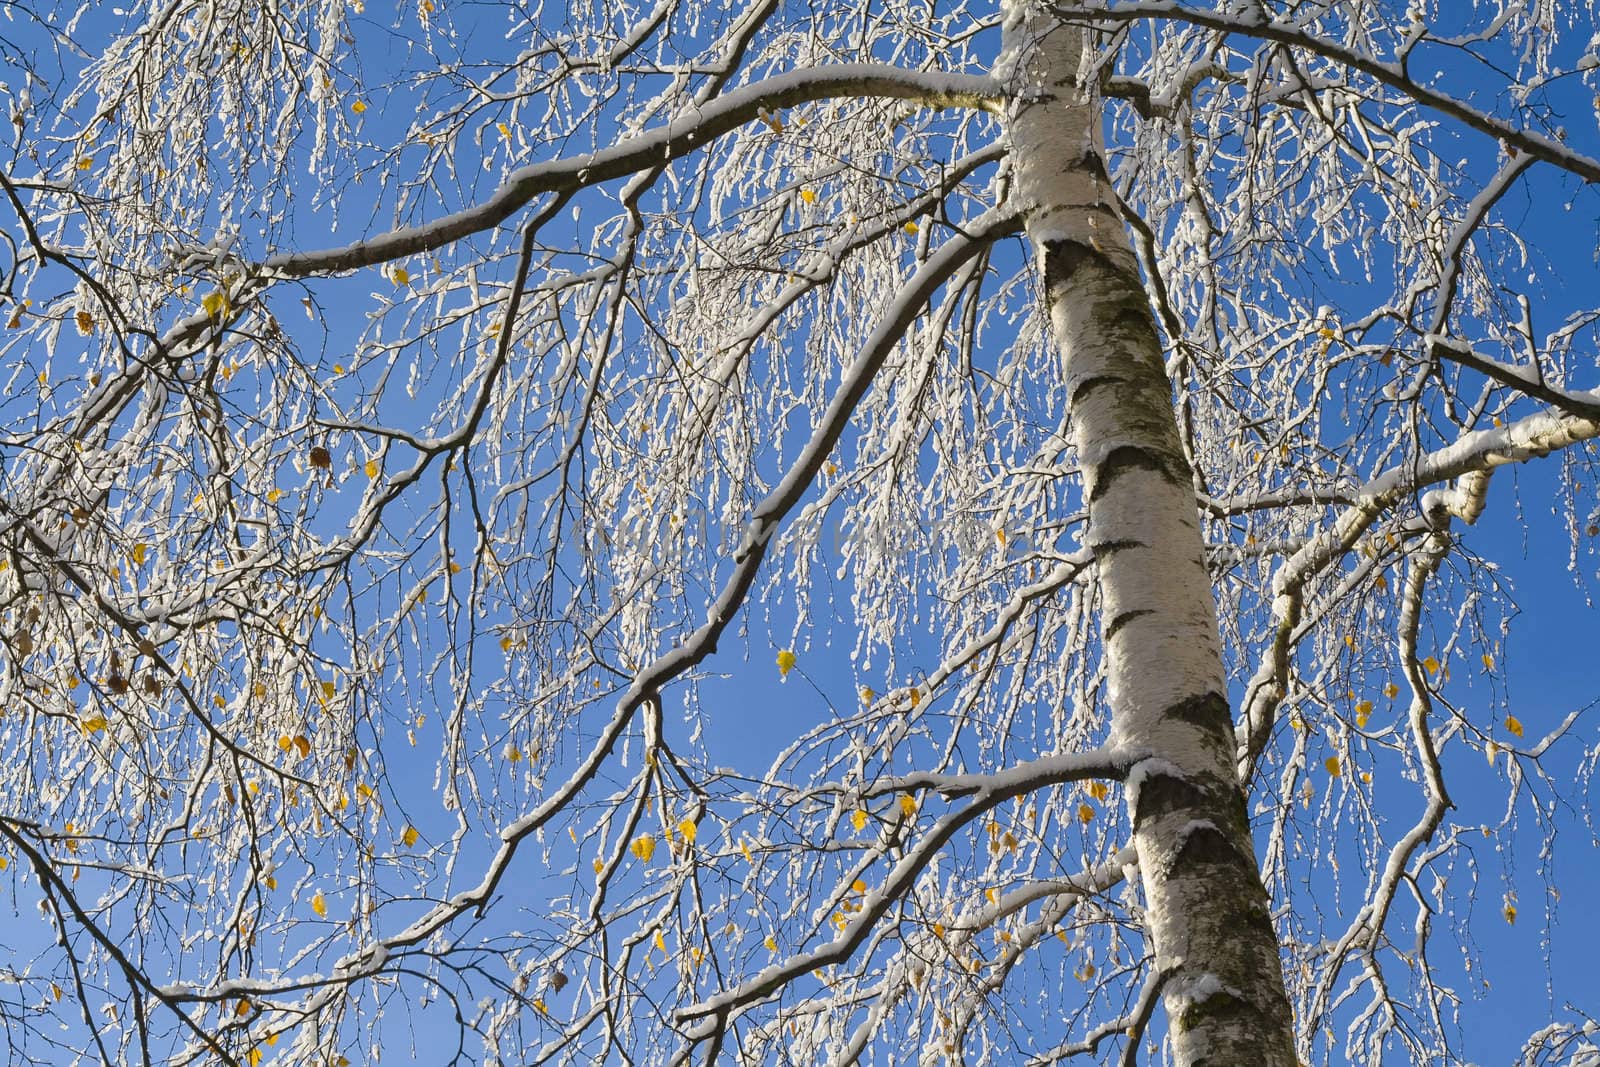 Birches just after the snowfall